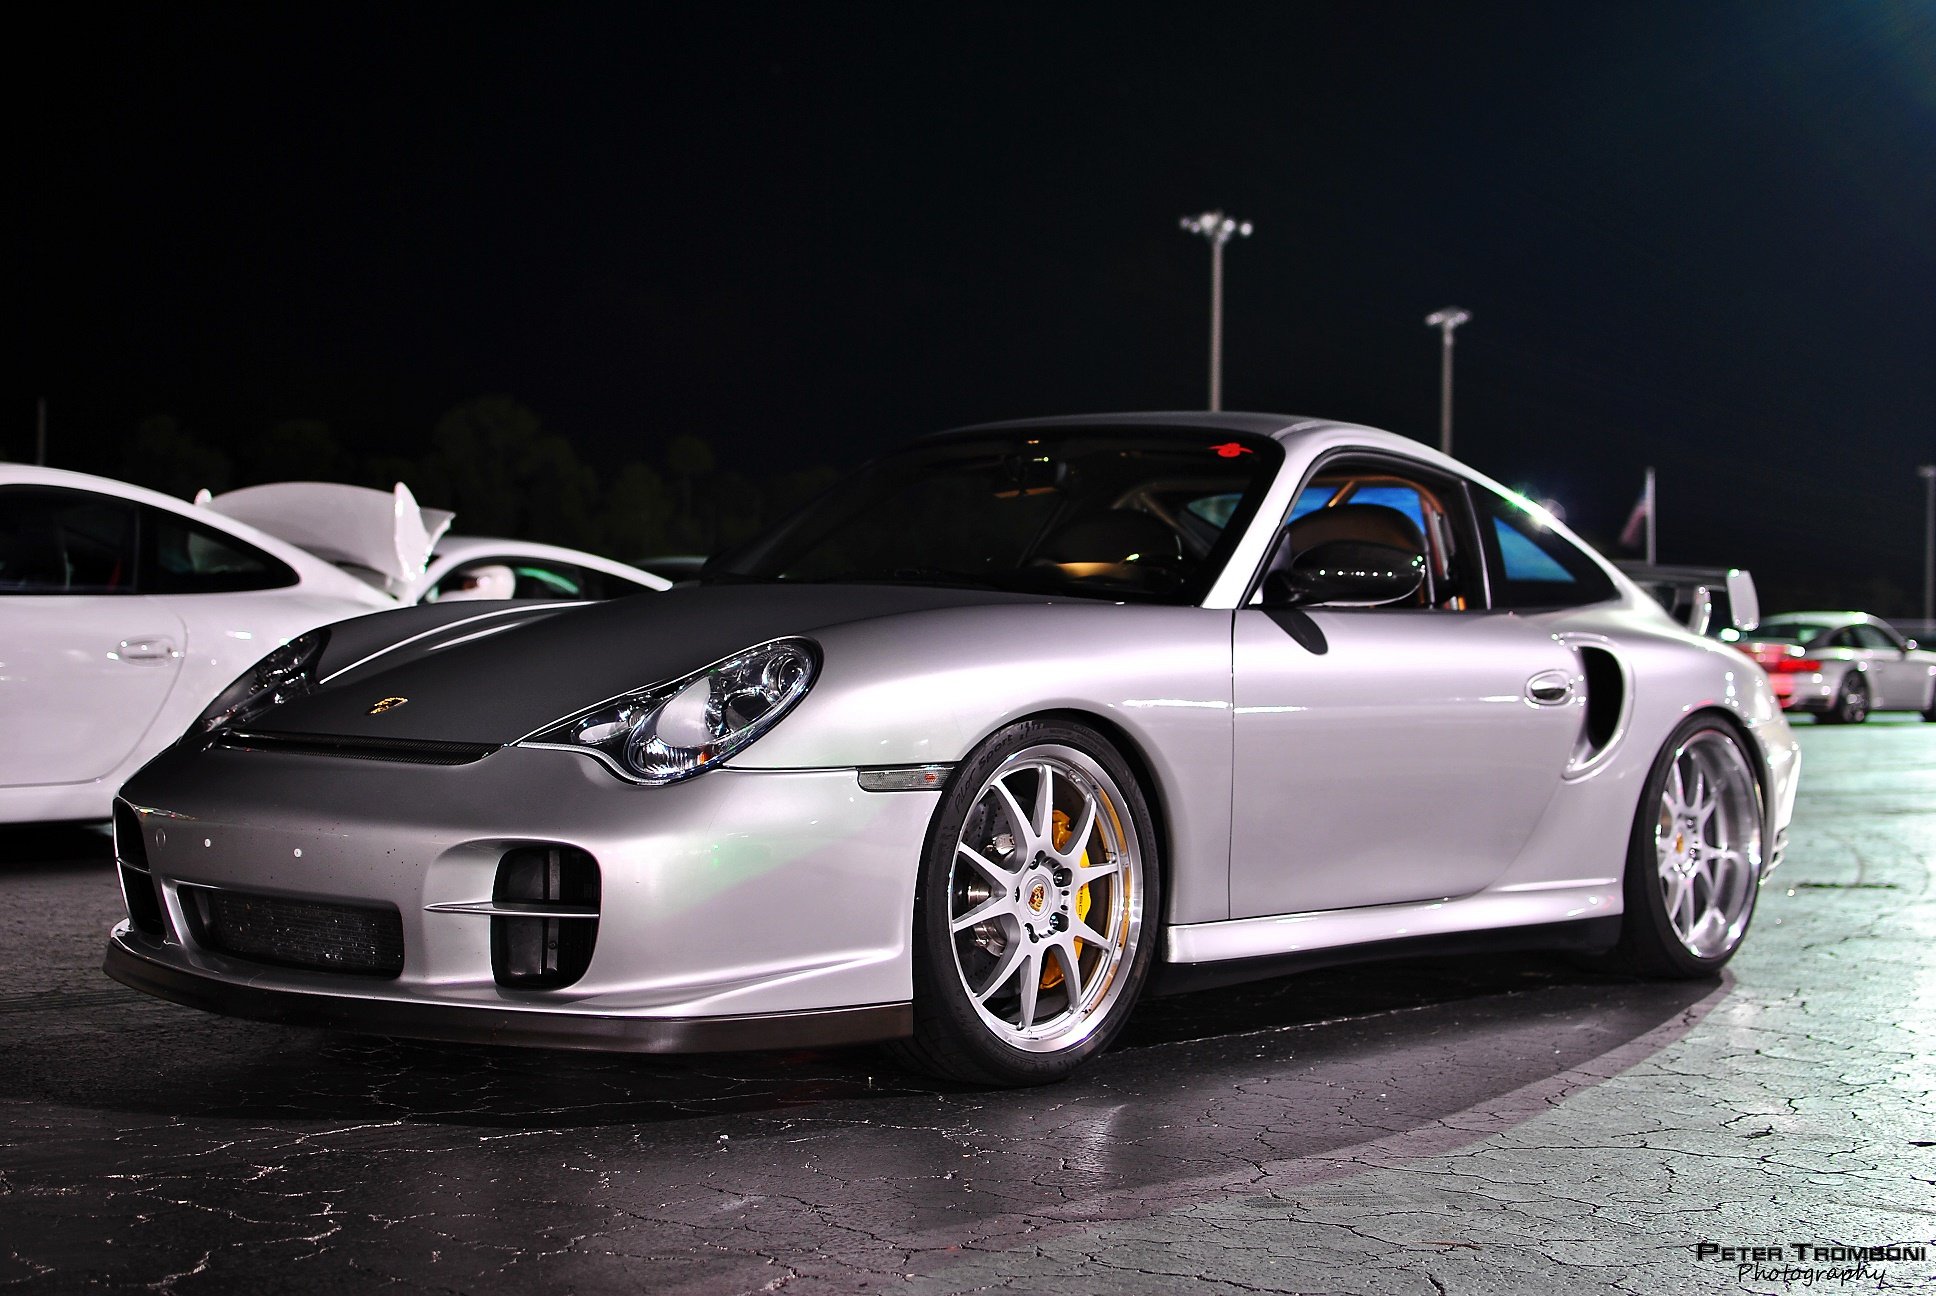 911, Cars, Coupe, Germany, Gt2, Gt2, Rs, Porsche, Gris, Grey Wallpaper